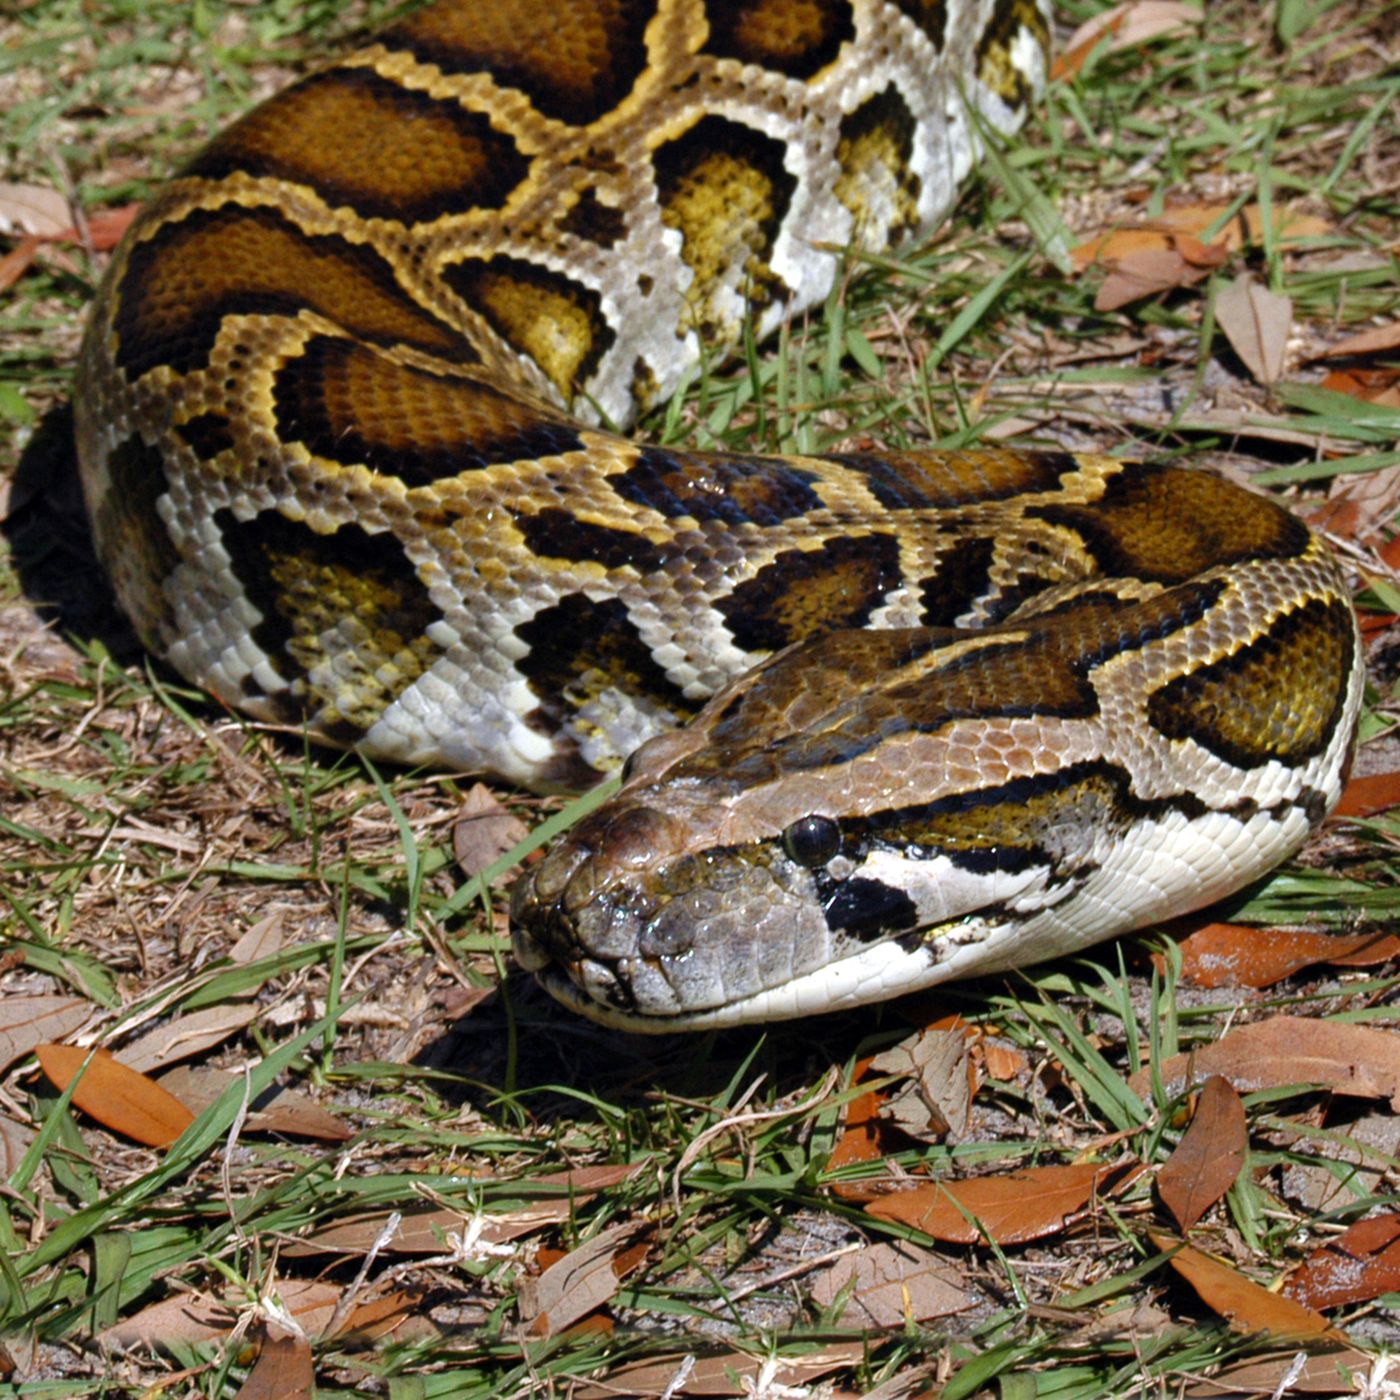 This 14-foot python was caught with 3 deer in its gut. That's a bad ...